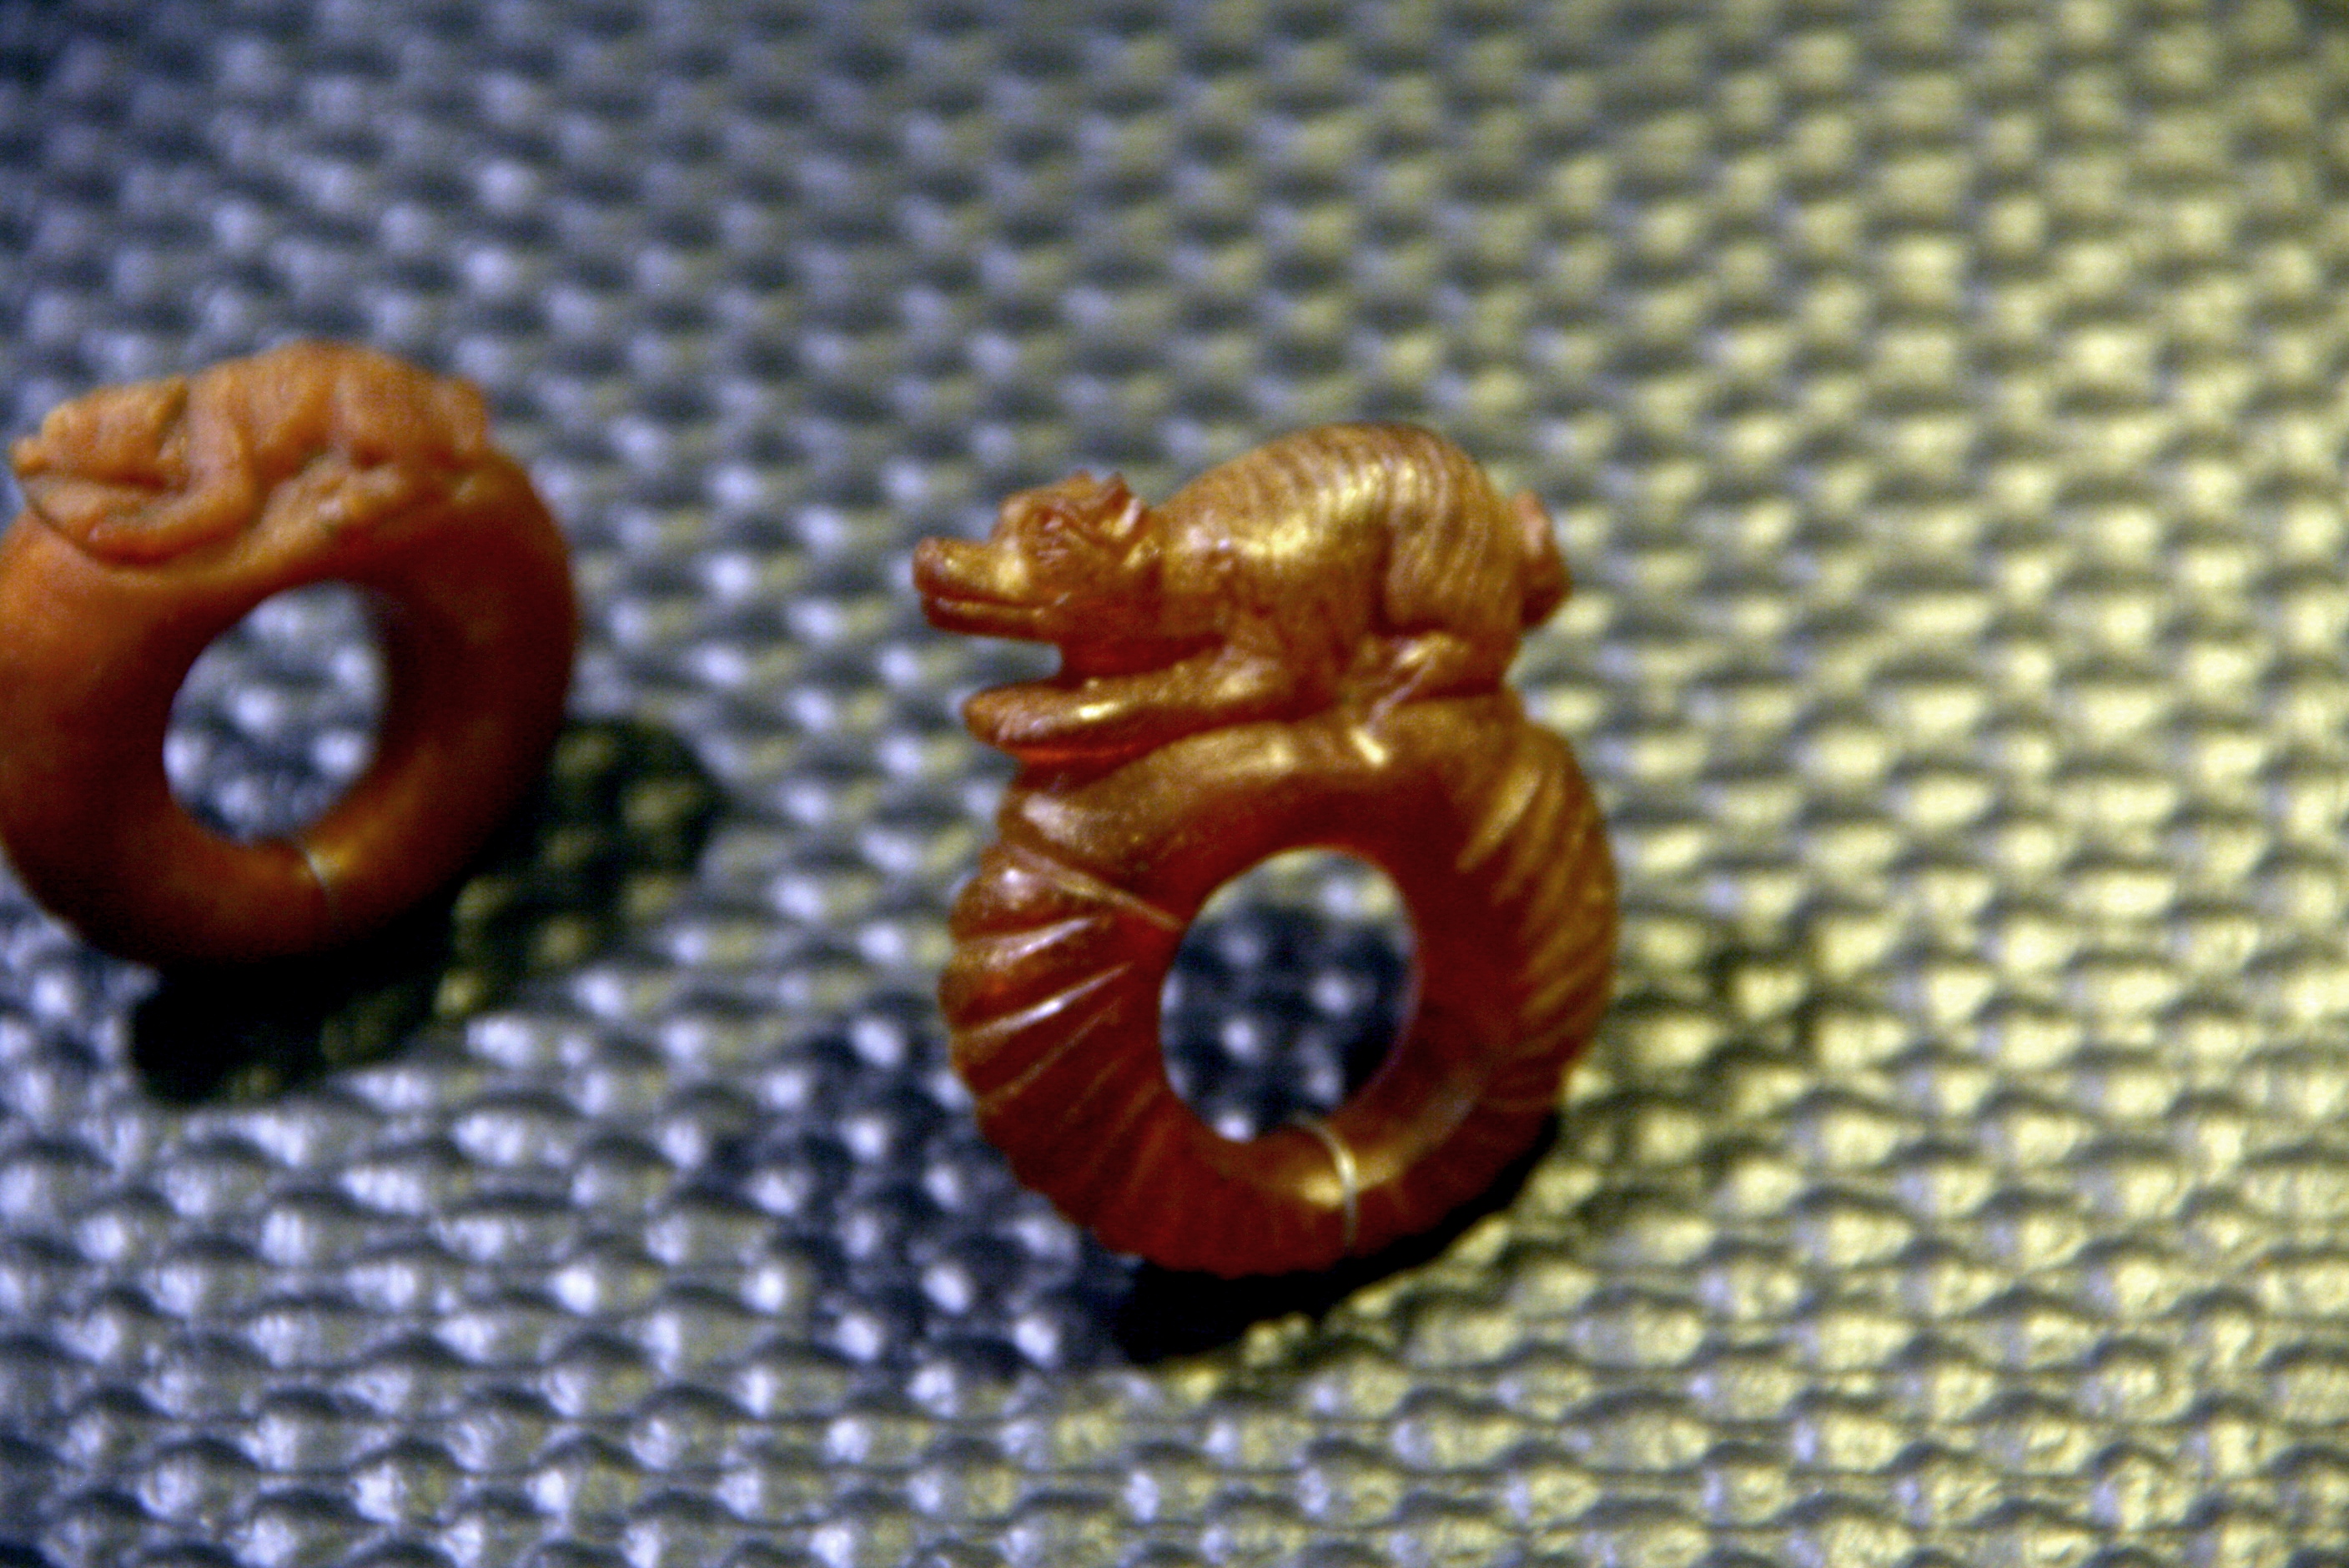 1137 Archaeological Museum%2C Udine Ancient Roman amber rings Photo by Giovanni Dall%27Orto%2C May 29 2015